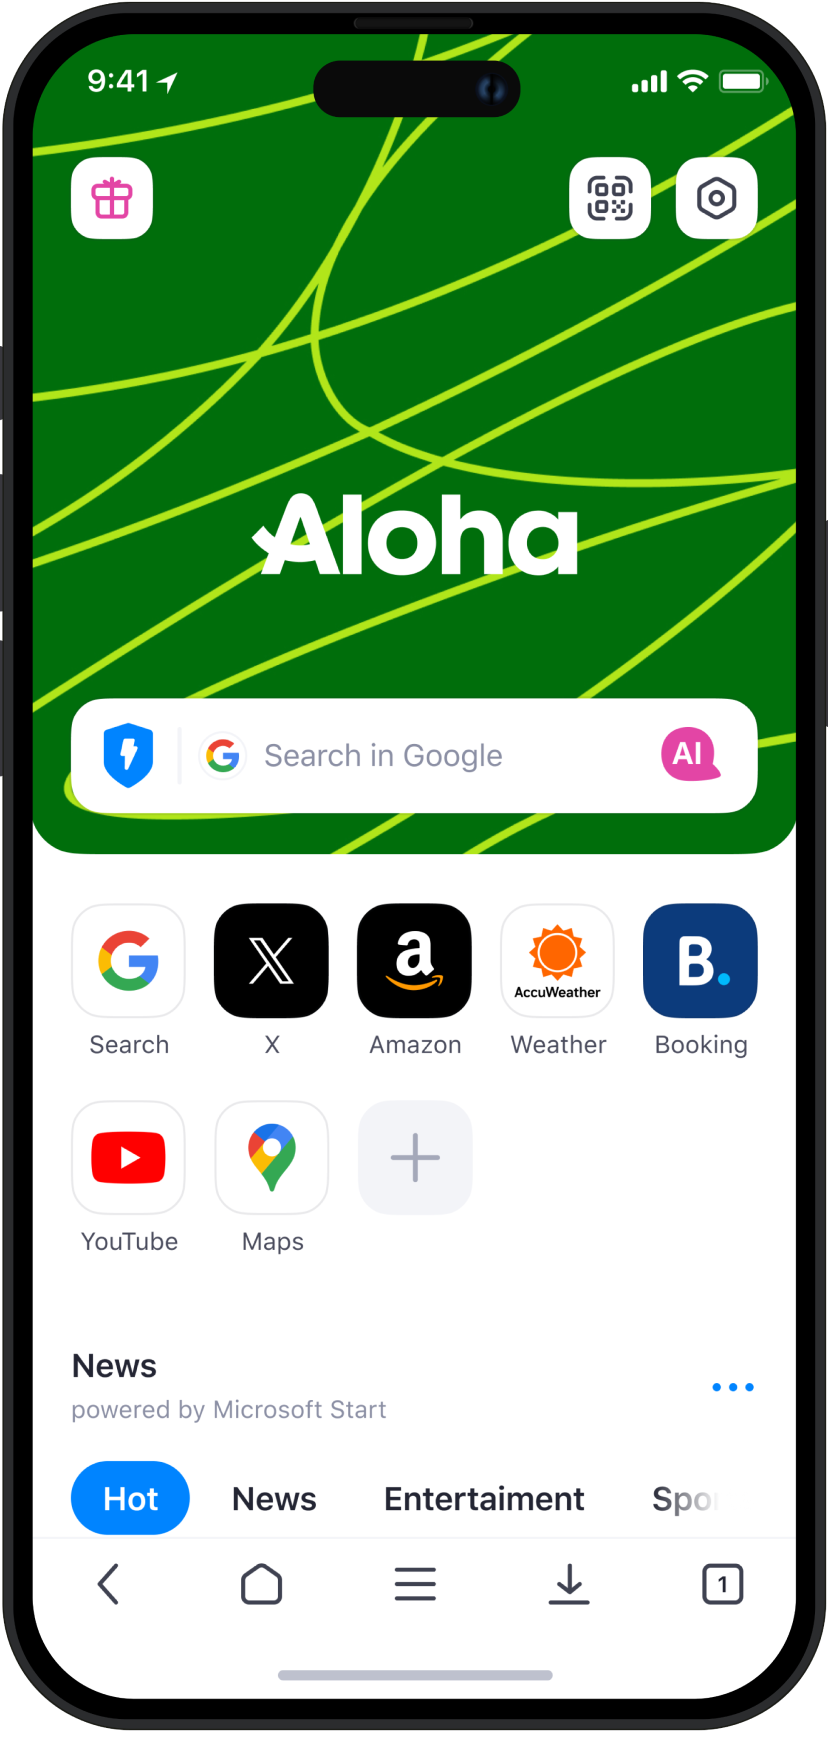 AdBlock is built into Aloha Browser and increases your privacy